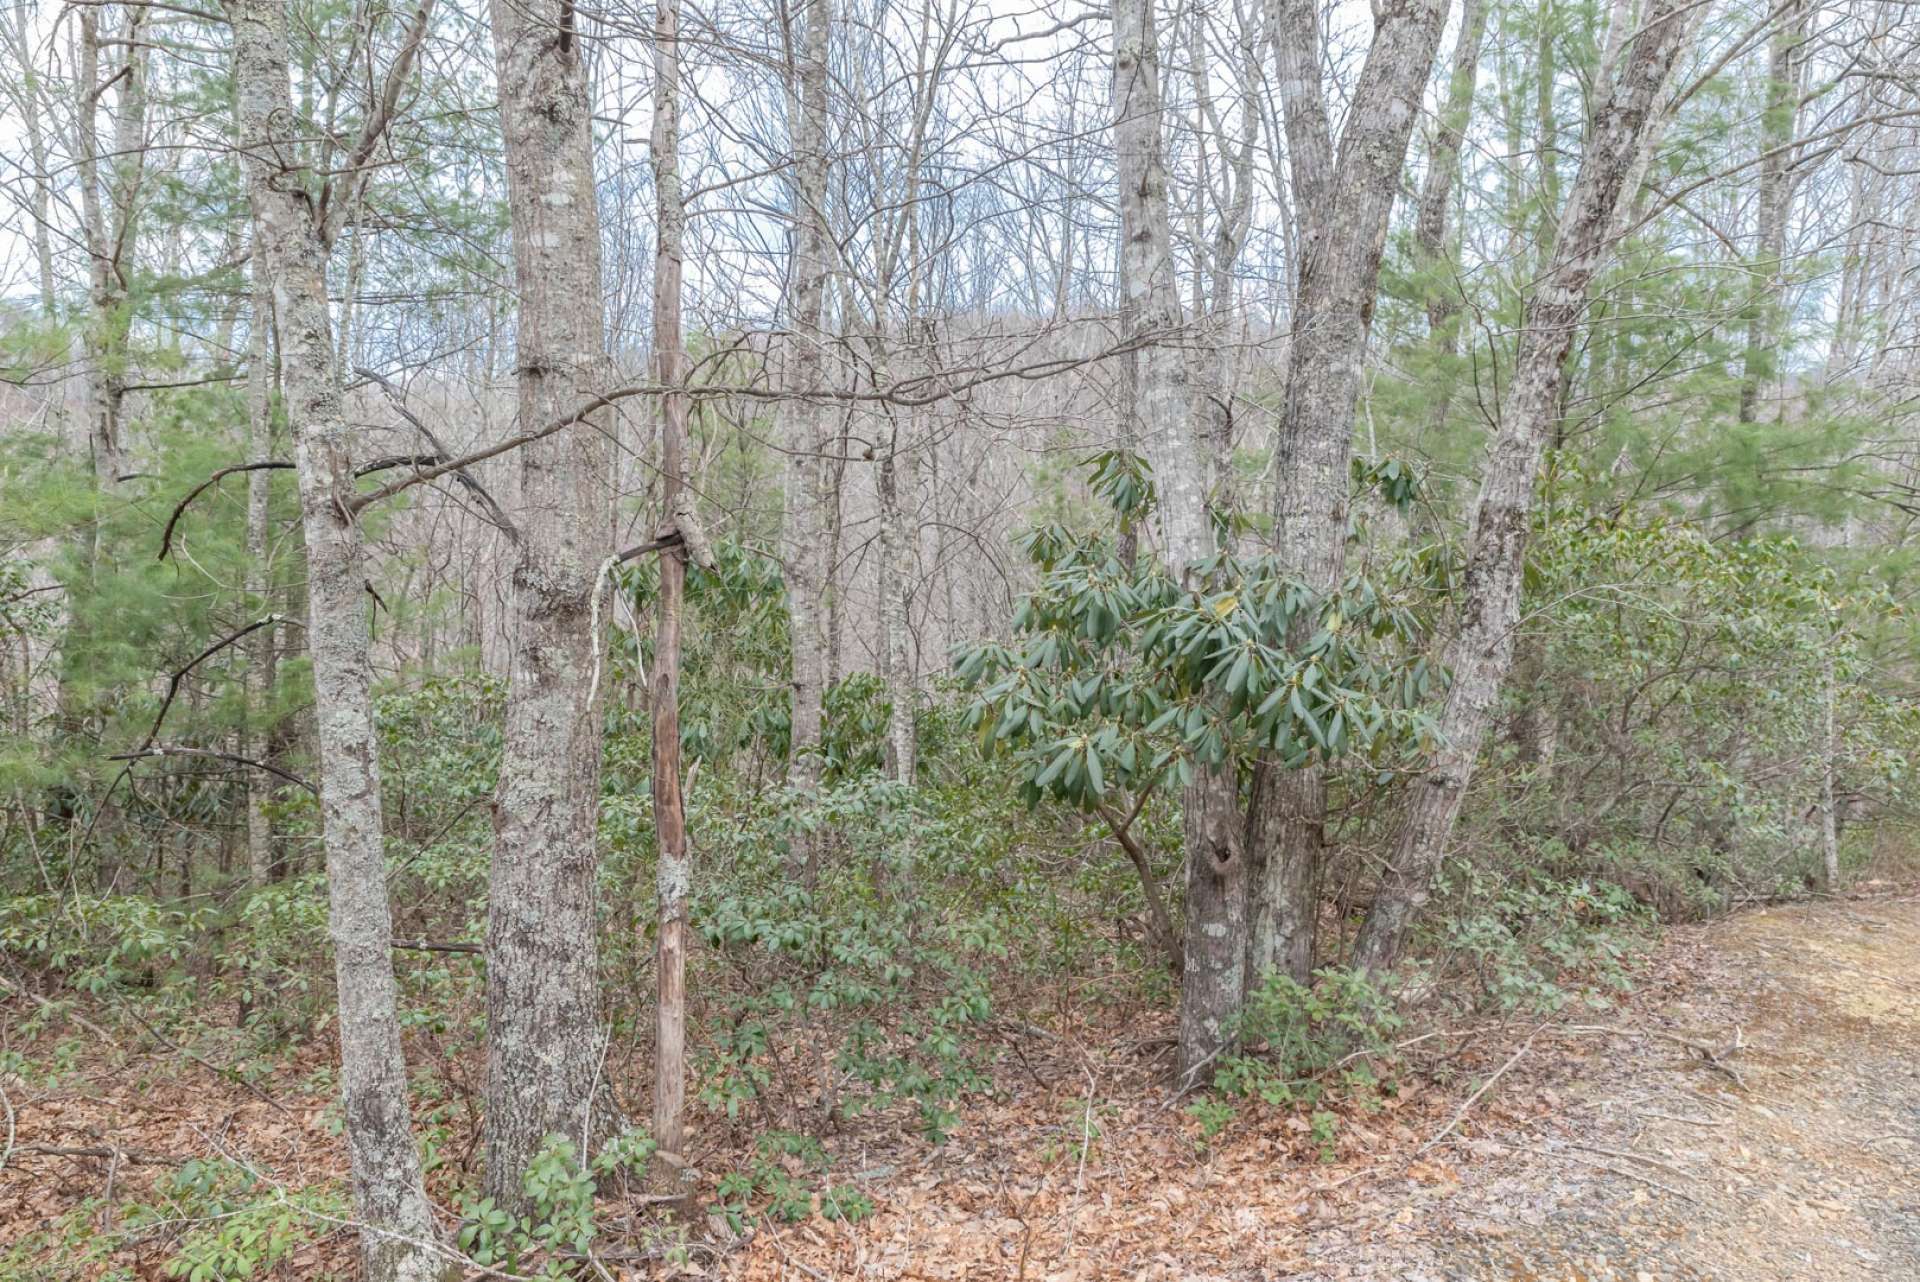 Lot 8 is available offering a peaceful wooded 1.51 acre home site.